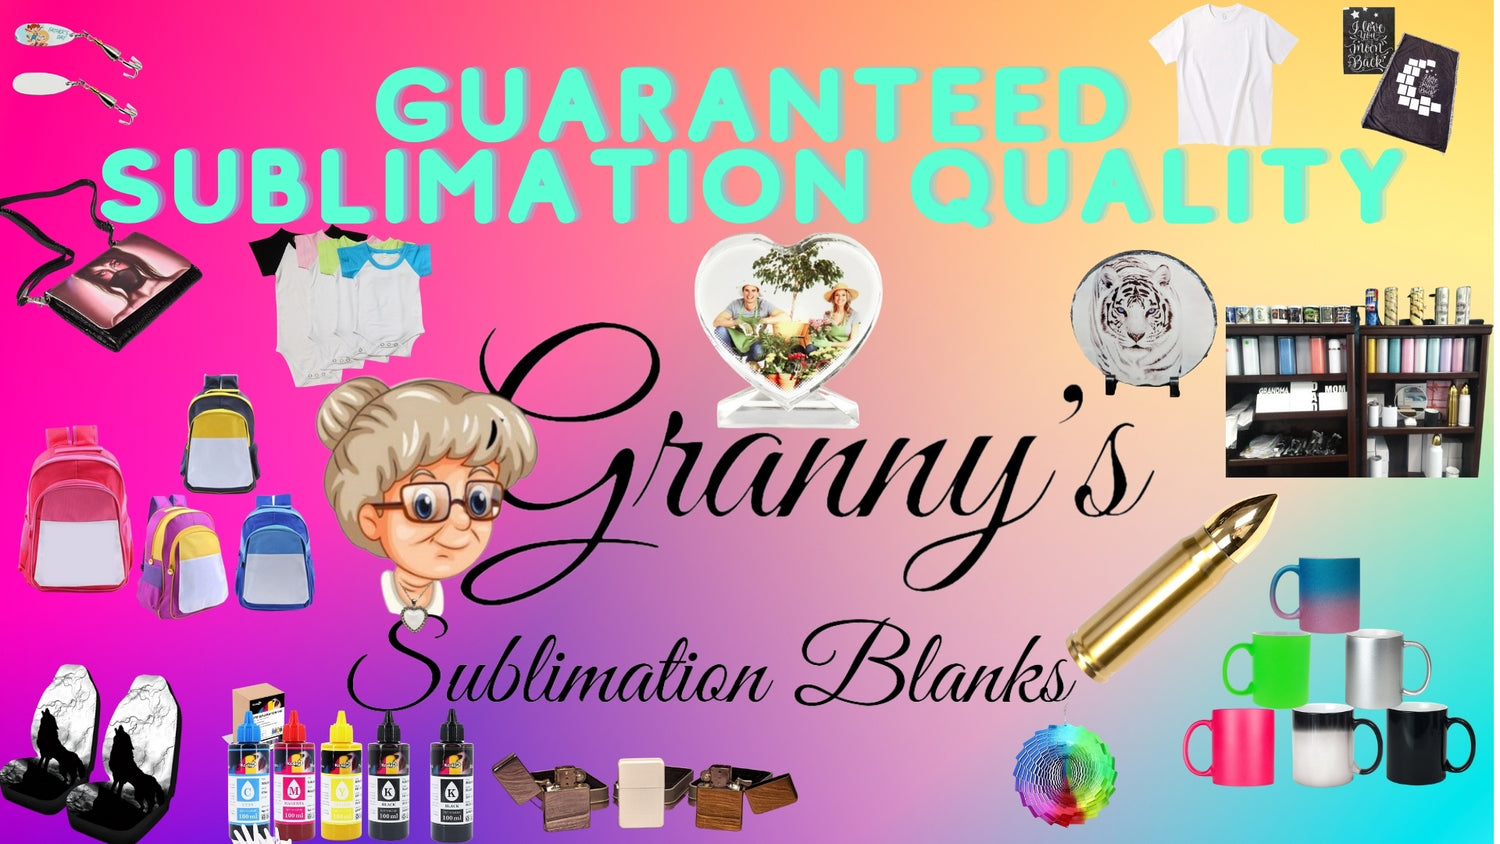 Sale Items Sublimation Items – Granny's Sublimation Blanks RTS